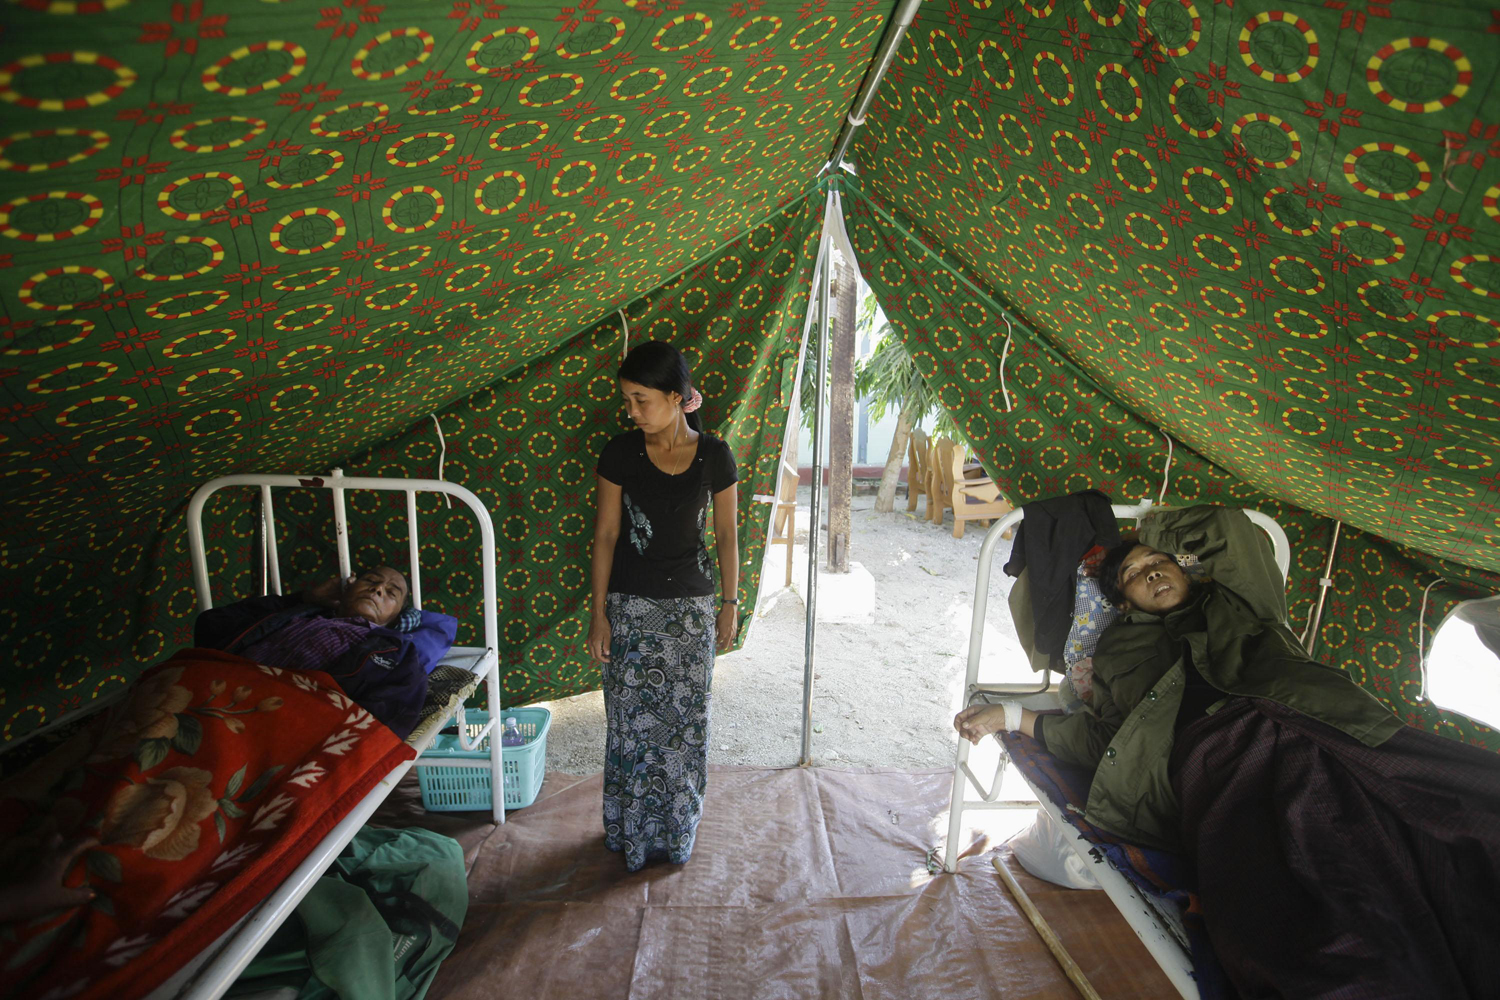 Image: Nov. 12, 2012. Injured people are treated outside a damaged hospital in Thabeik Kyin township, Myanmar.